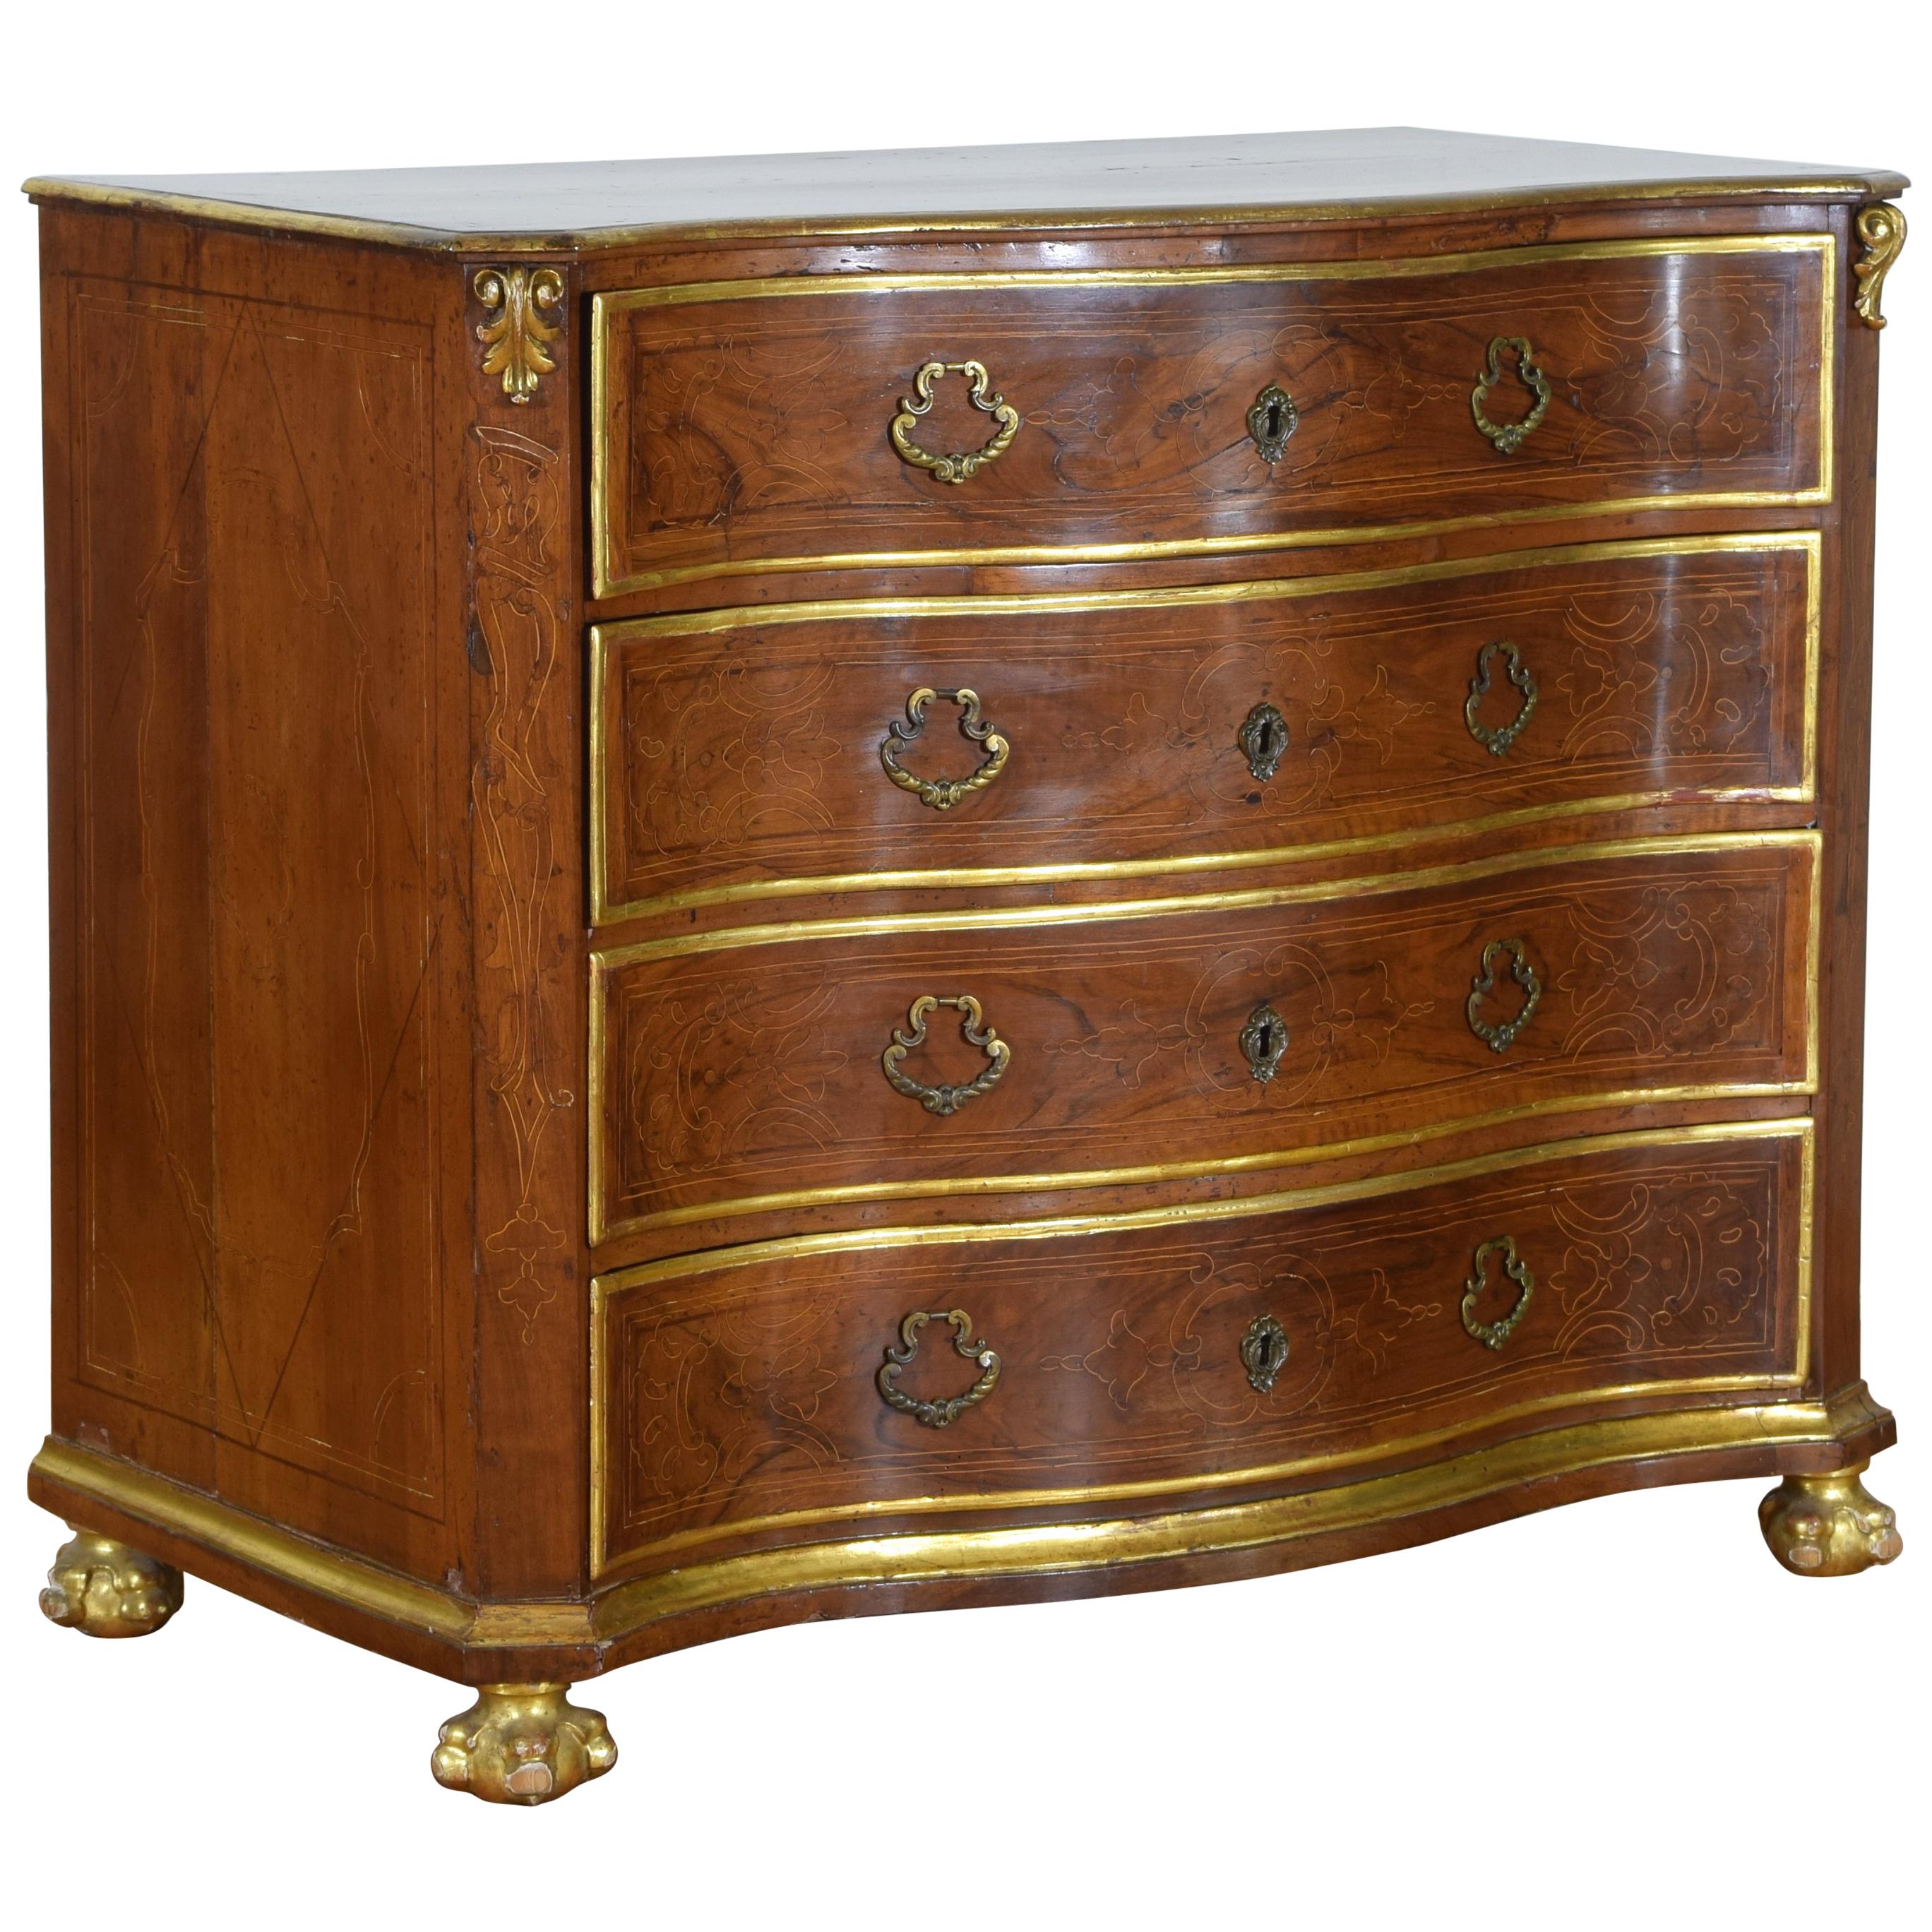 Austrian Rococo Walnut and Gilded Four-Drawer Commode, 18th Century